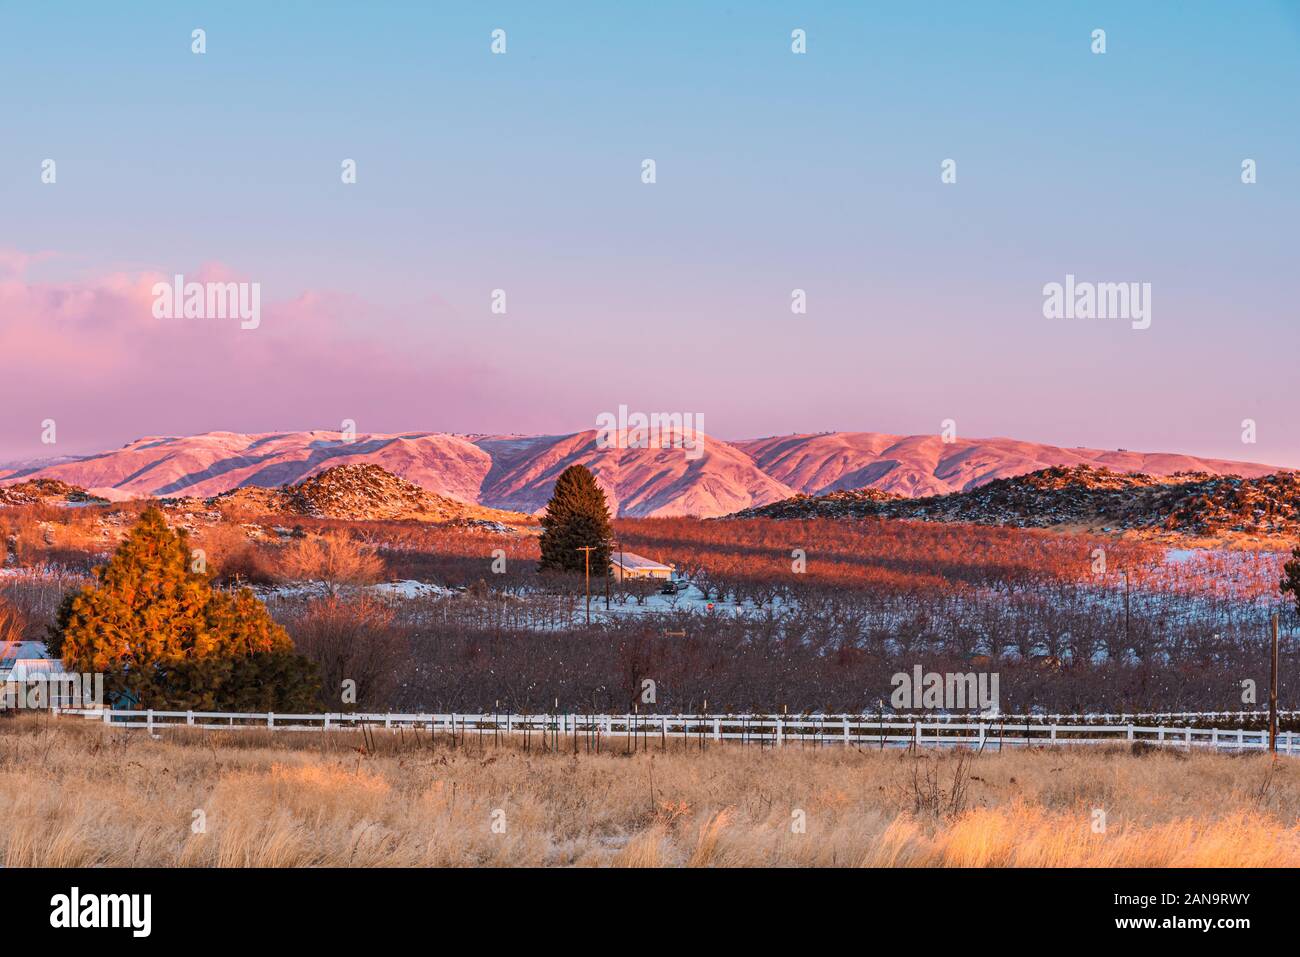 Colorful sunrise over a snow covered orchard in eastern washington with grasses in the foreground and mountains in the distance Stock Photo